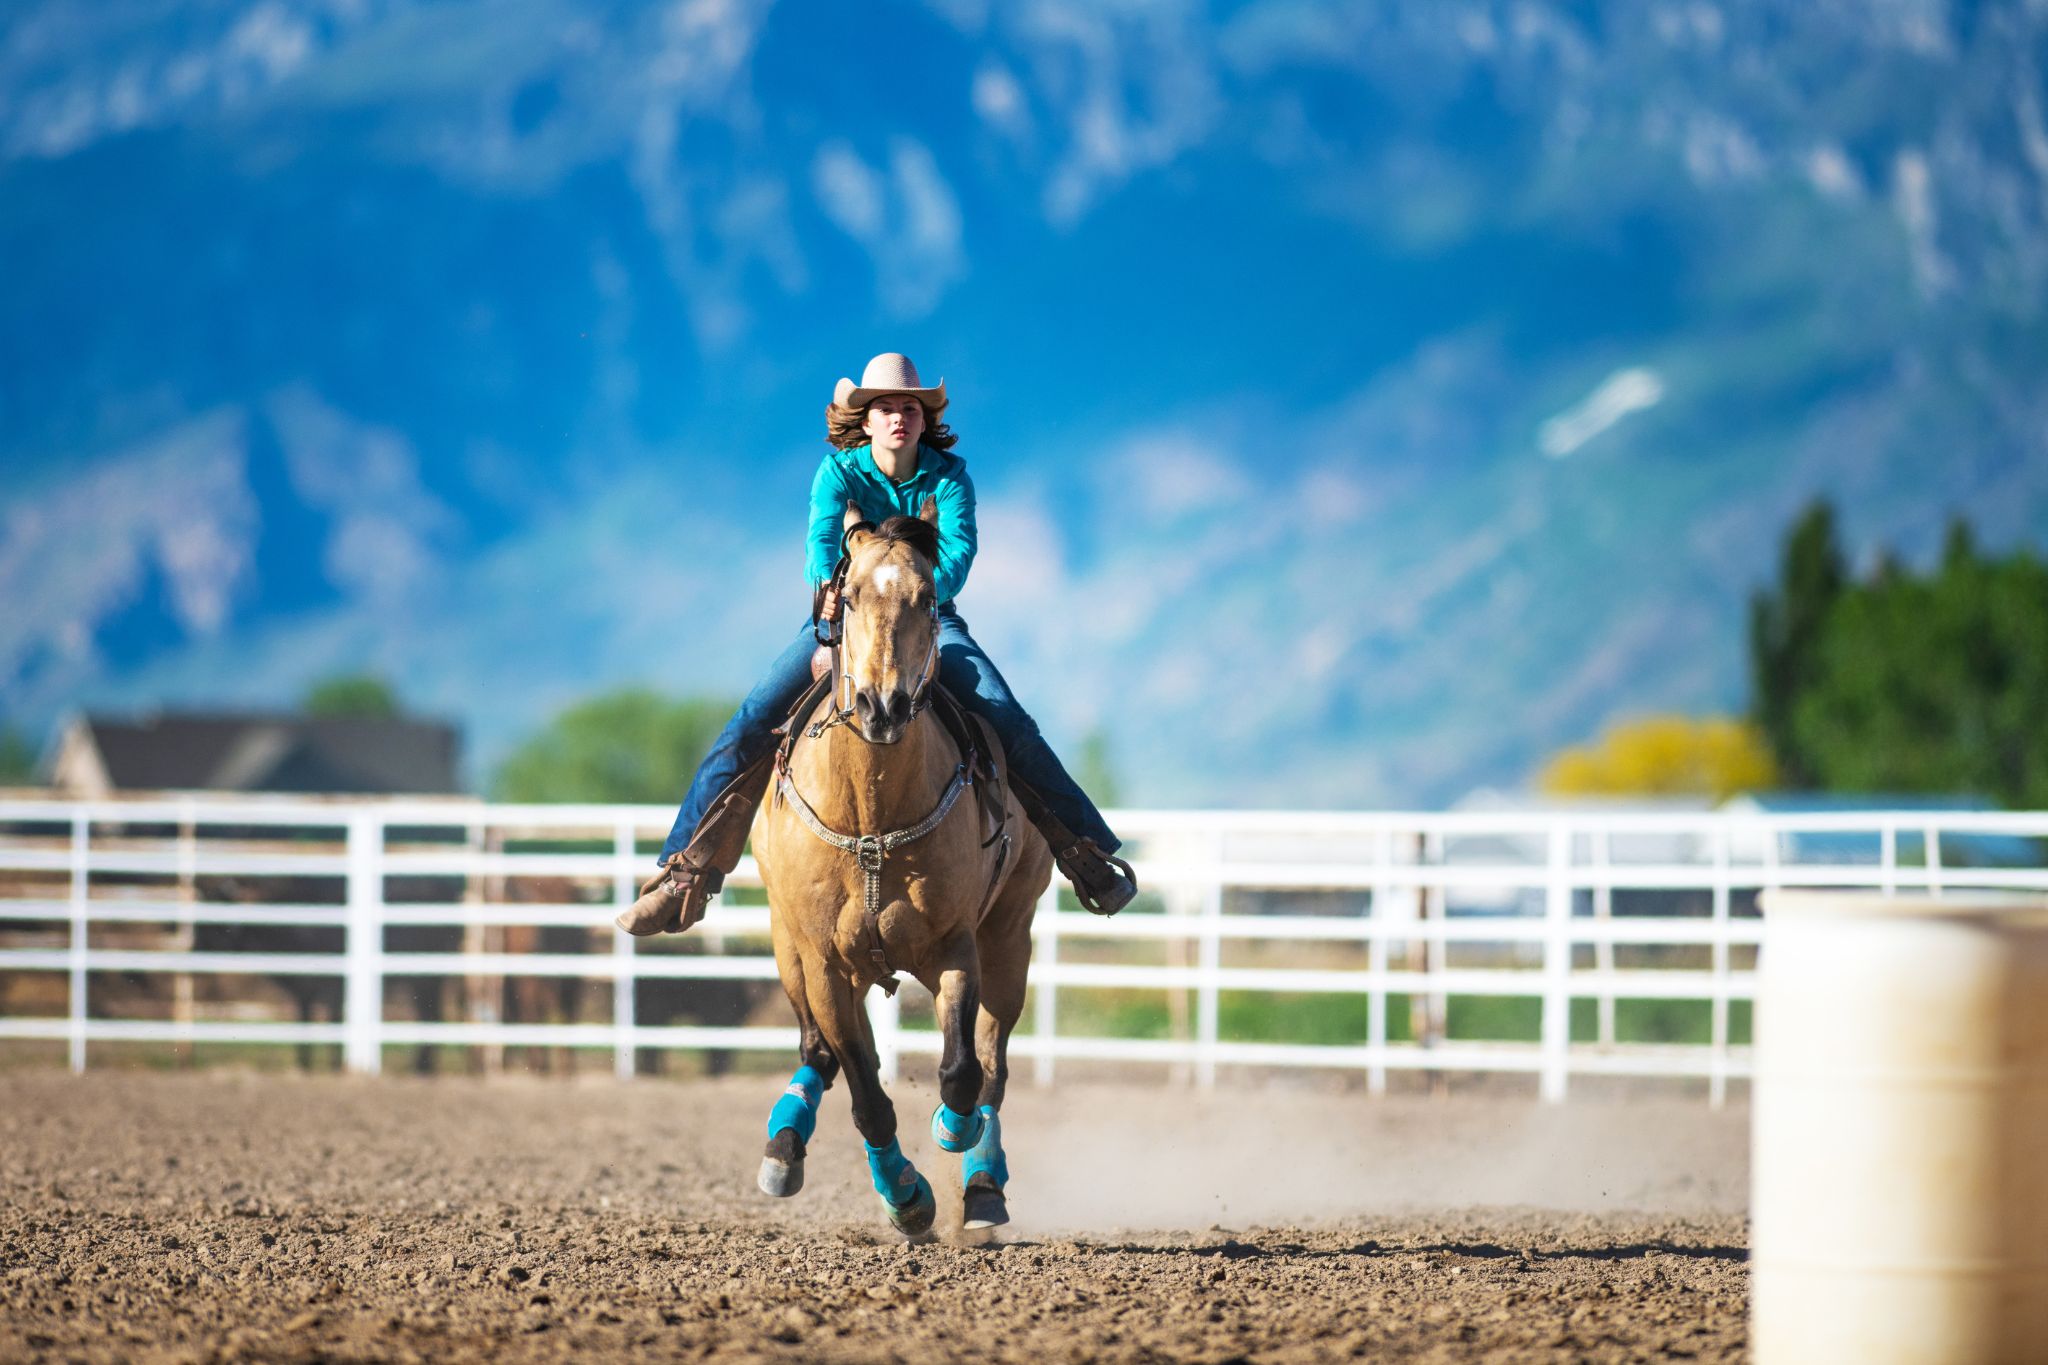 Running Qh Horses With Rider